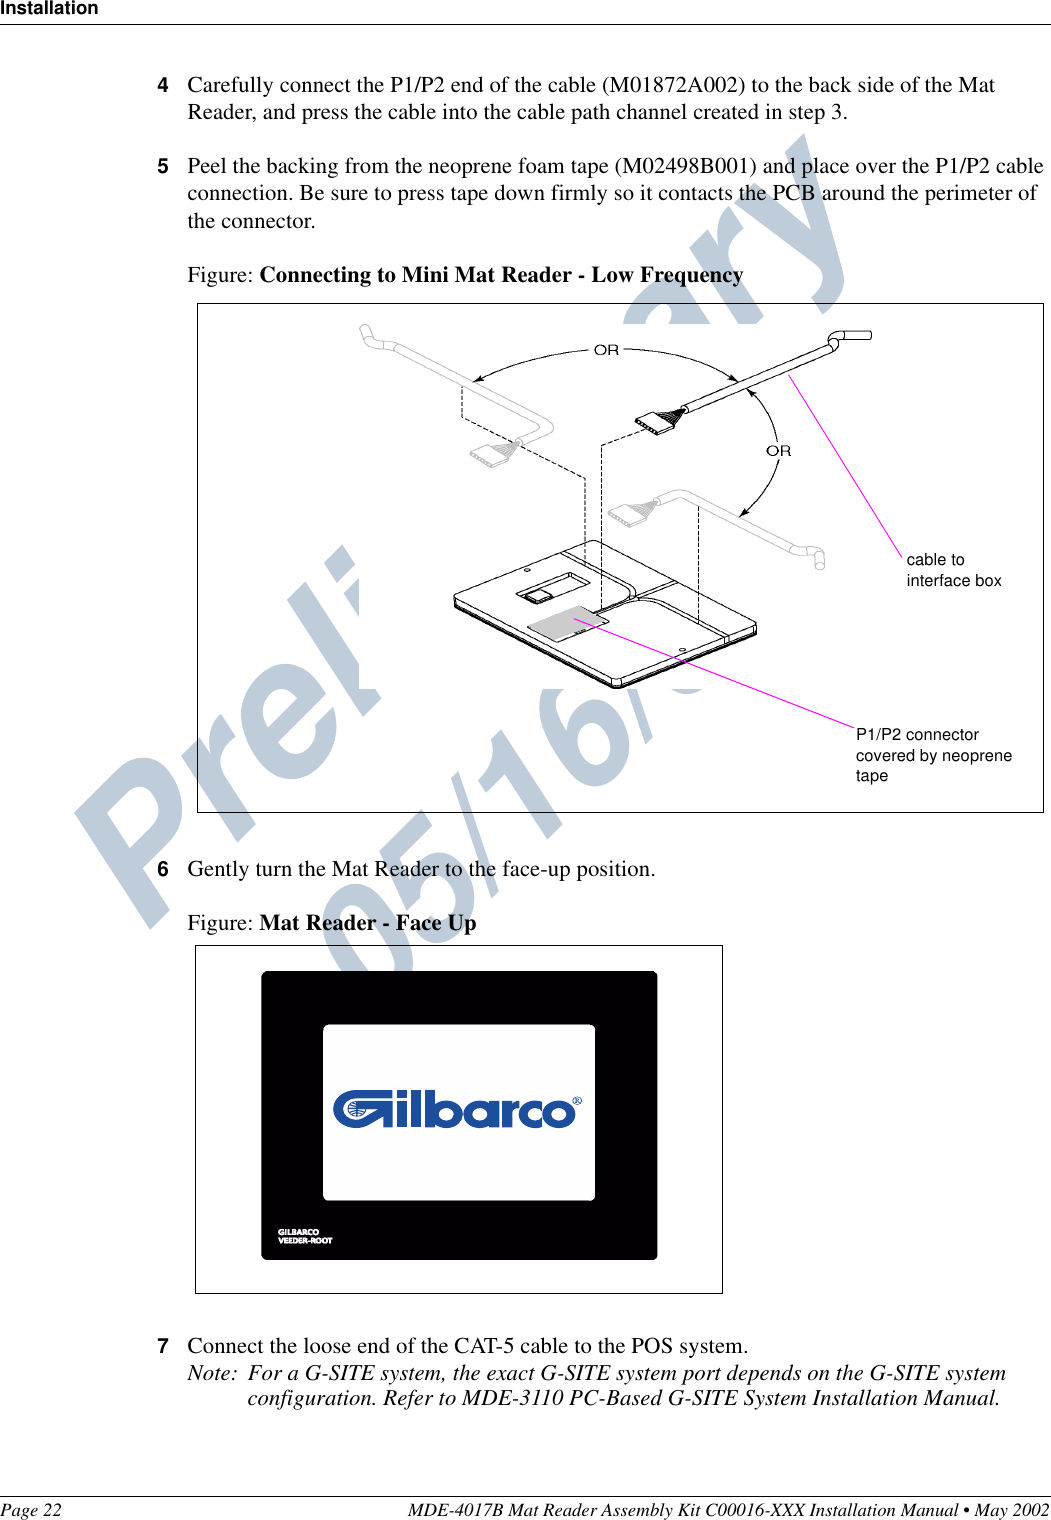 Preliminary  05/16/02InstallationPage 22 MDE-4017B Mat Reader Assembly Kit C00016-XXX Installation Manual • May 20024Carefully connect the P1/P2 end of the cable (M01872A002) to the back side of the Mat Reader, and press the cable into the cable path channel created in step 3.5Peel the backing from the neoprene foam tape (M02498B001) and place over the P1/P2 cable connection. Be sure to press tape down firmly so it contacts the PCB around the perimeter of the connector.Figure: Connecting to Mini Mat Reader - Low Frequency6Gently turn the Mat Reader to the face-up position.Figure: Mat Reader - Face Up7Connect the loose end of the CAT-5 cable to the POS system.Note: For a G-SITE system, the exact G-SITE system port depends on the G-SITE system configuration. Refer to MDE-3110 PC-Based G-SITE System Installation Manual.P1/P2 connectorcovered by neoprene tapecable to interface box